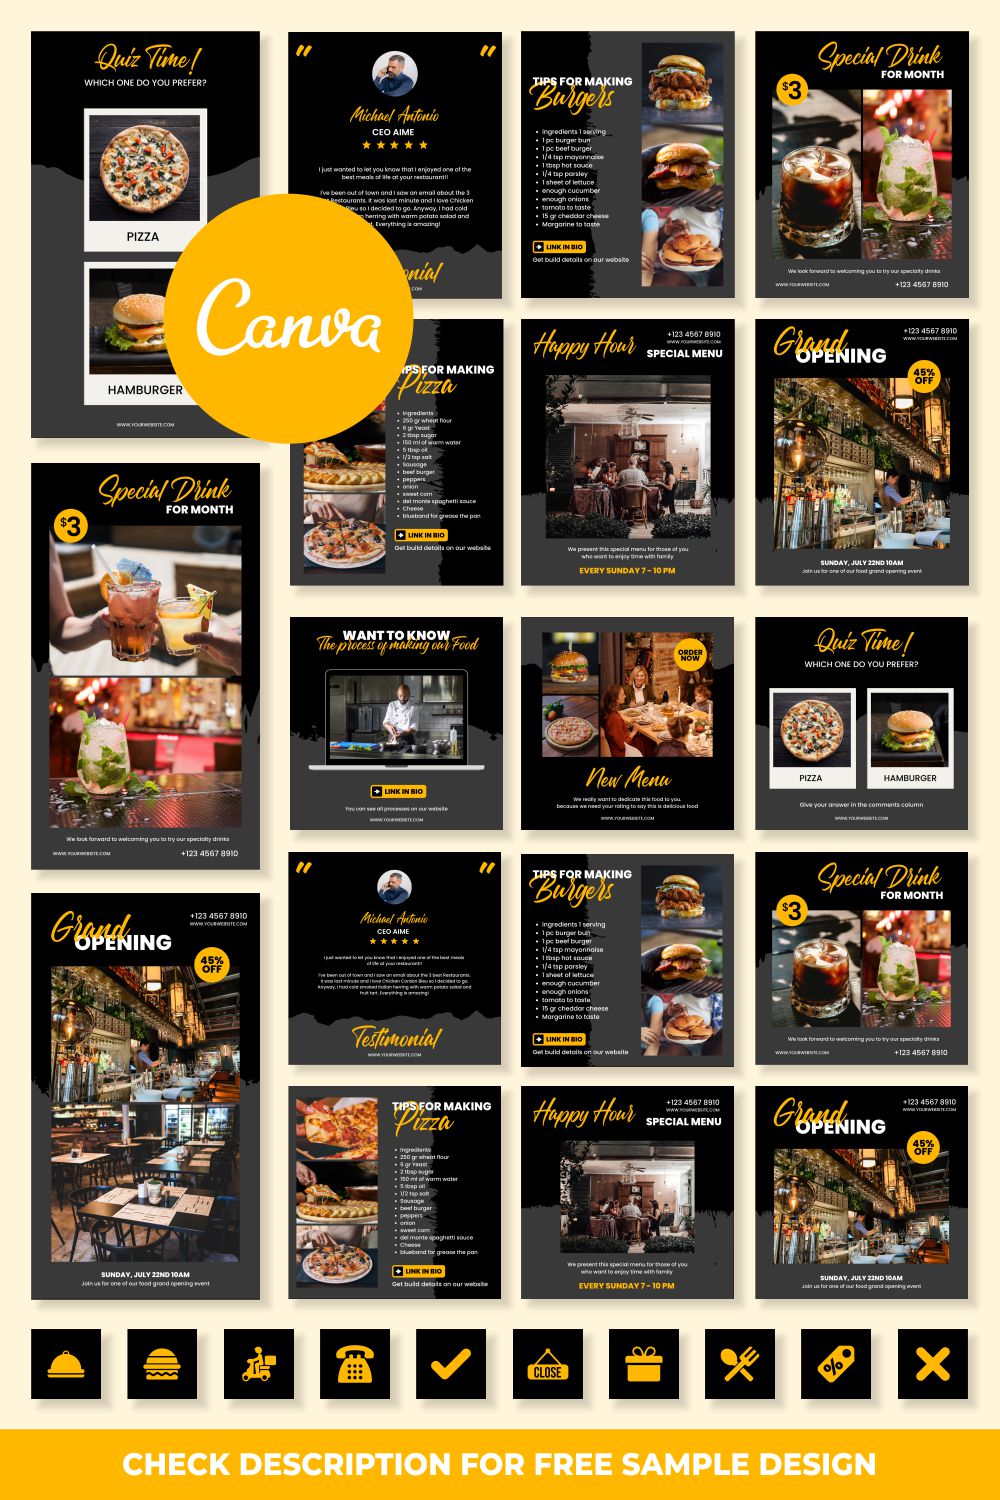 Restaurant Instagram Story and Post Canva Template Pinterest Image.